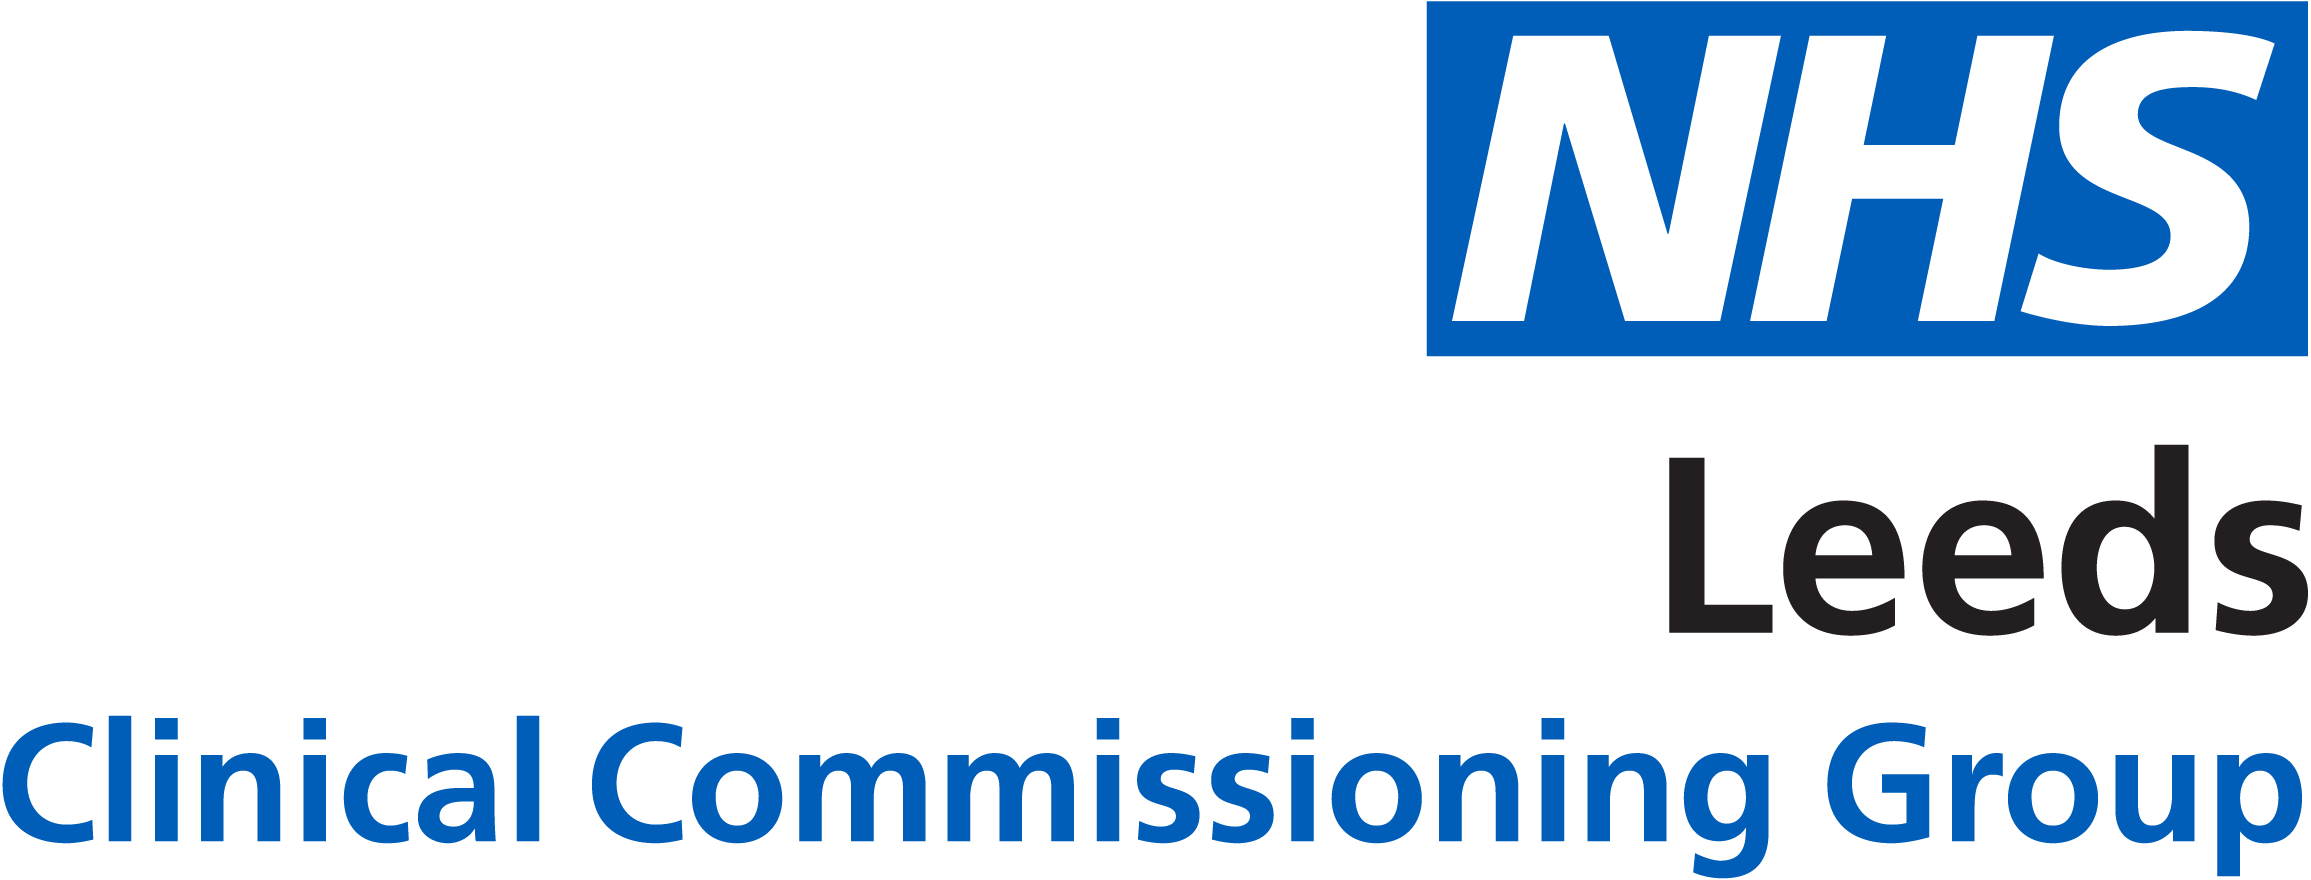 NHS Leeds Clinical Commissioning Groups Partnership